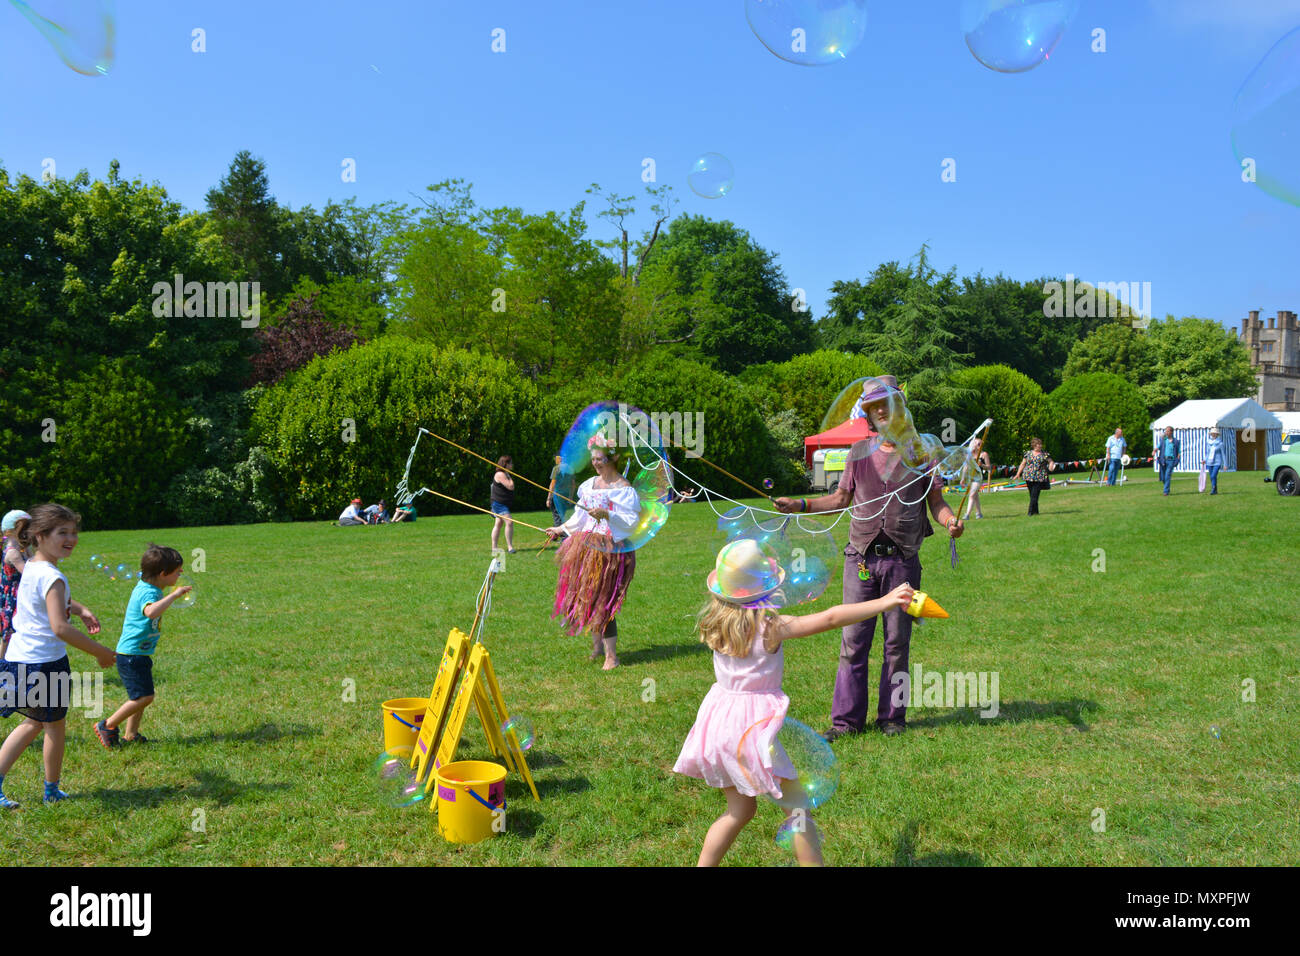 bubblemania, bubbles, spring, playing, kids